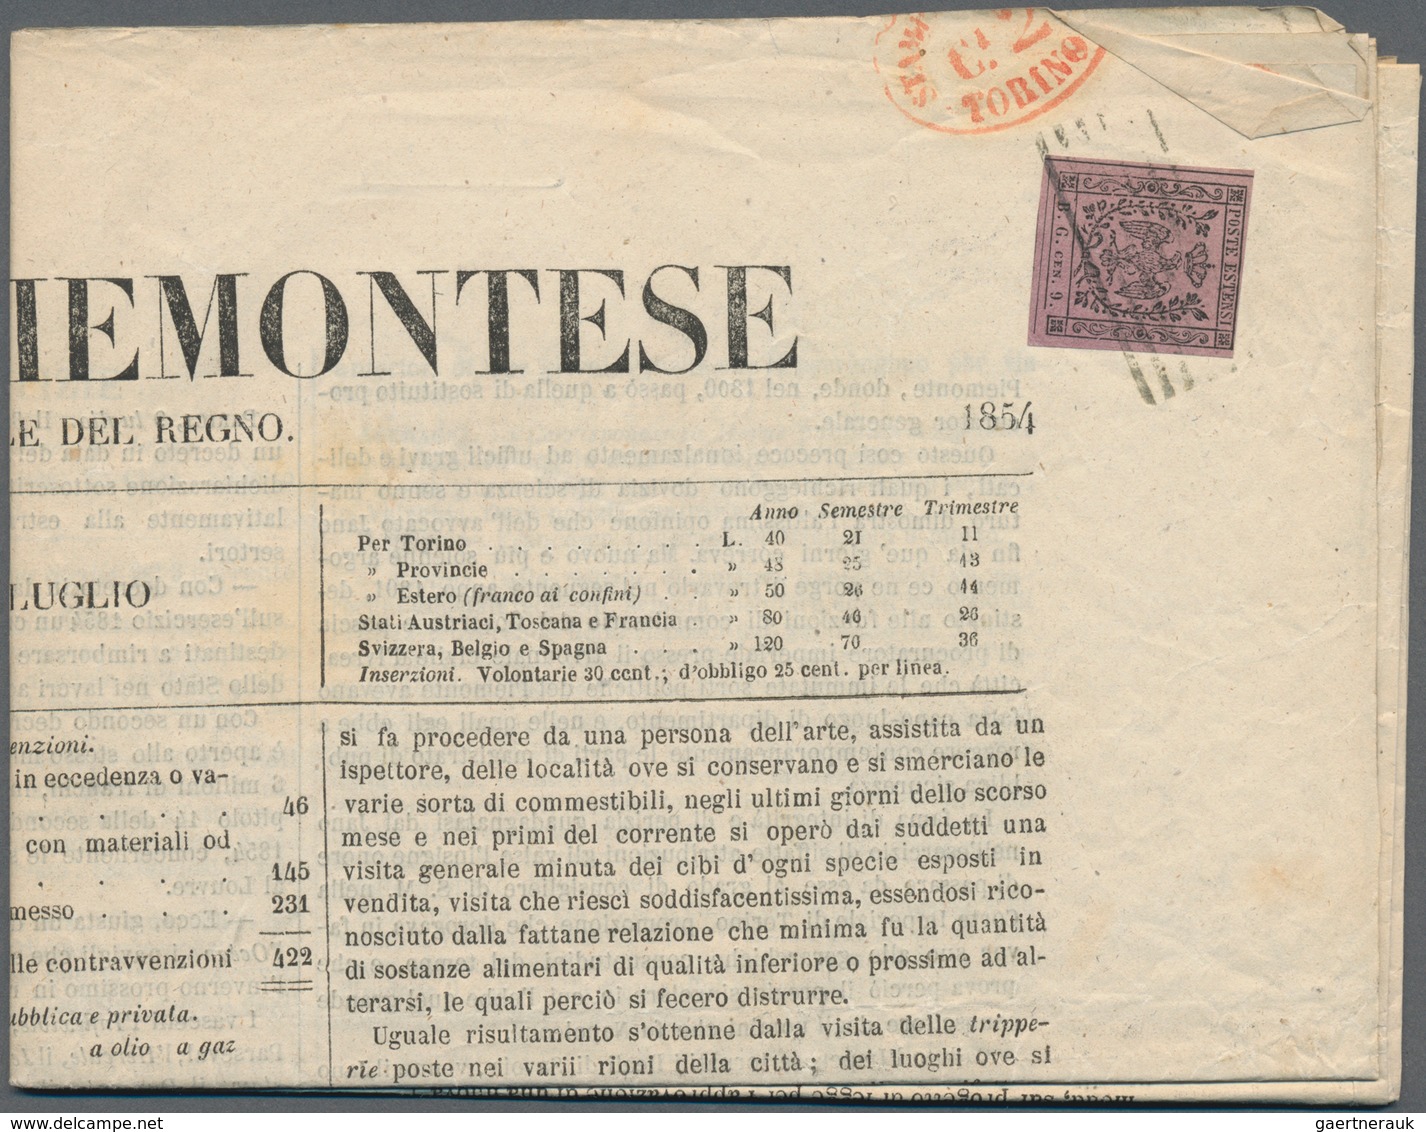 Italien: 1852-1985, AN EXCITING OFFERING OF "THE GREAT ITALY INVESTMENT STOCK" An important stock of